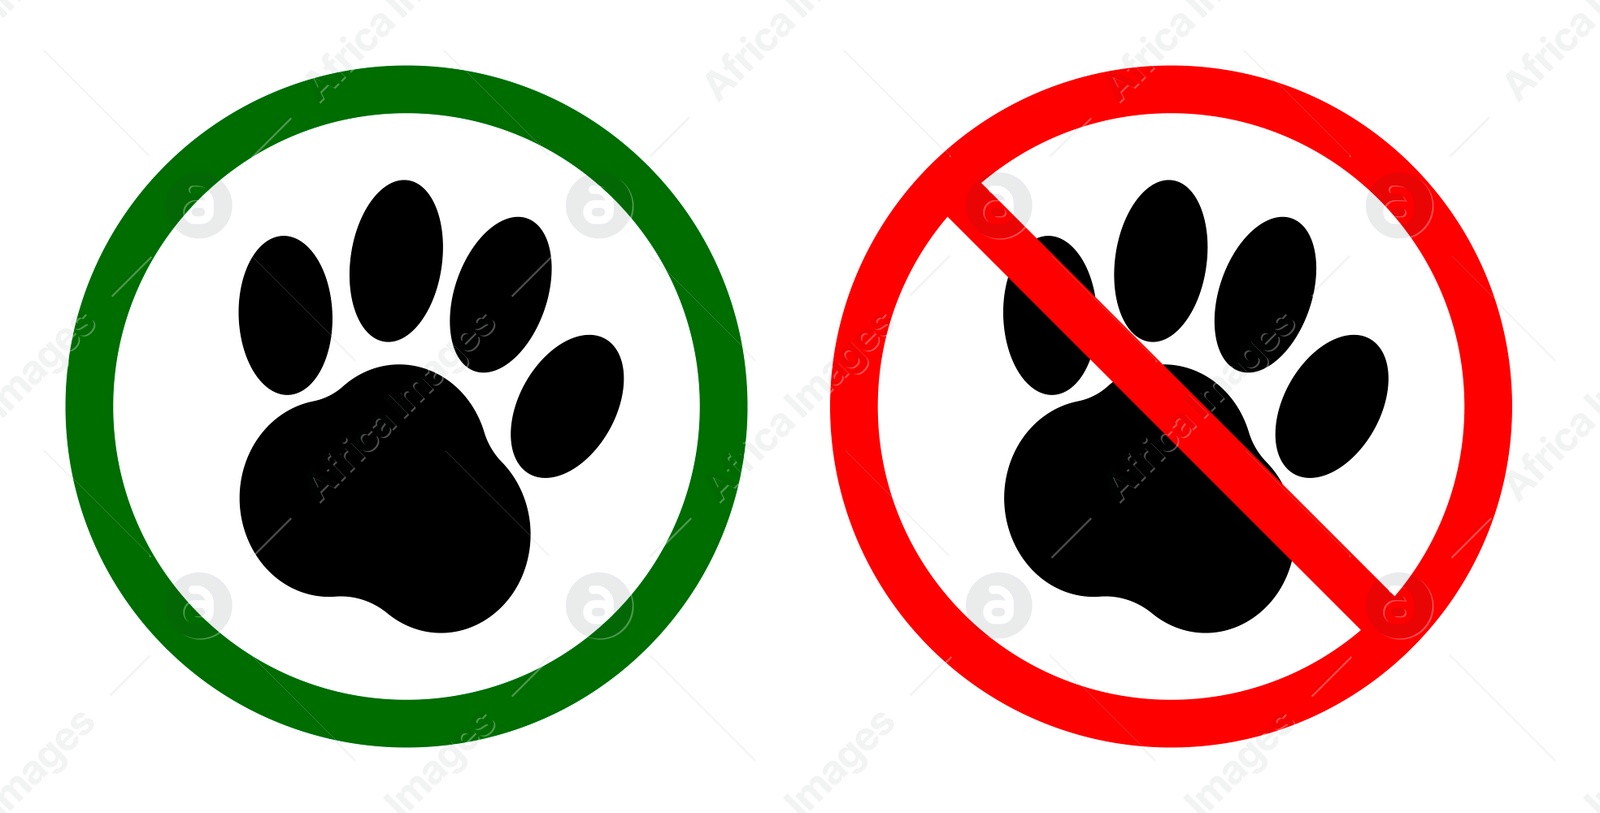 Illustration of Signs DOGS ZONE AND NO PETS ALLOWED on white background, collage. Illustration